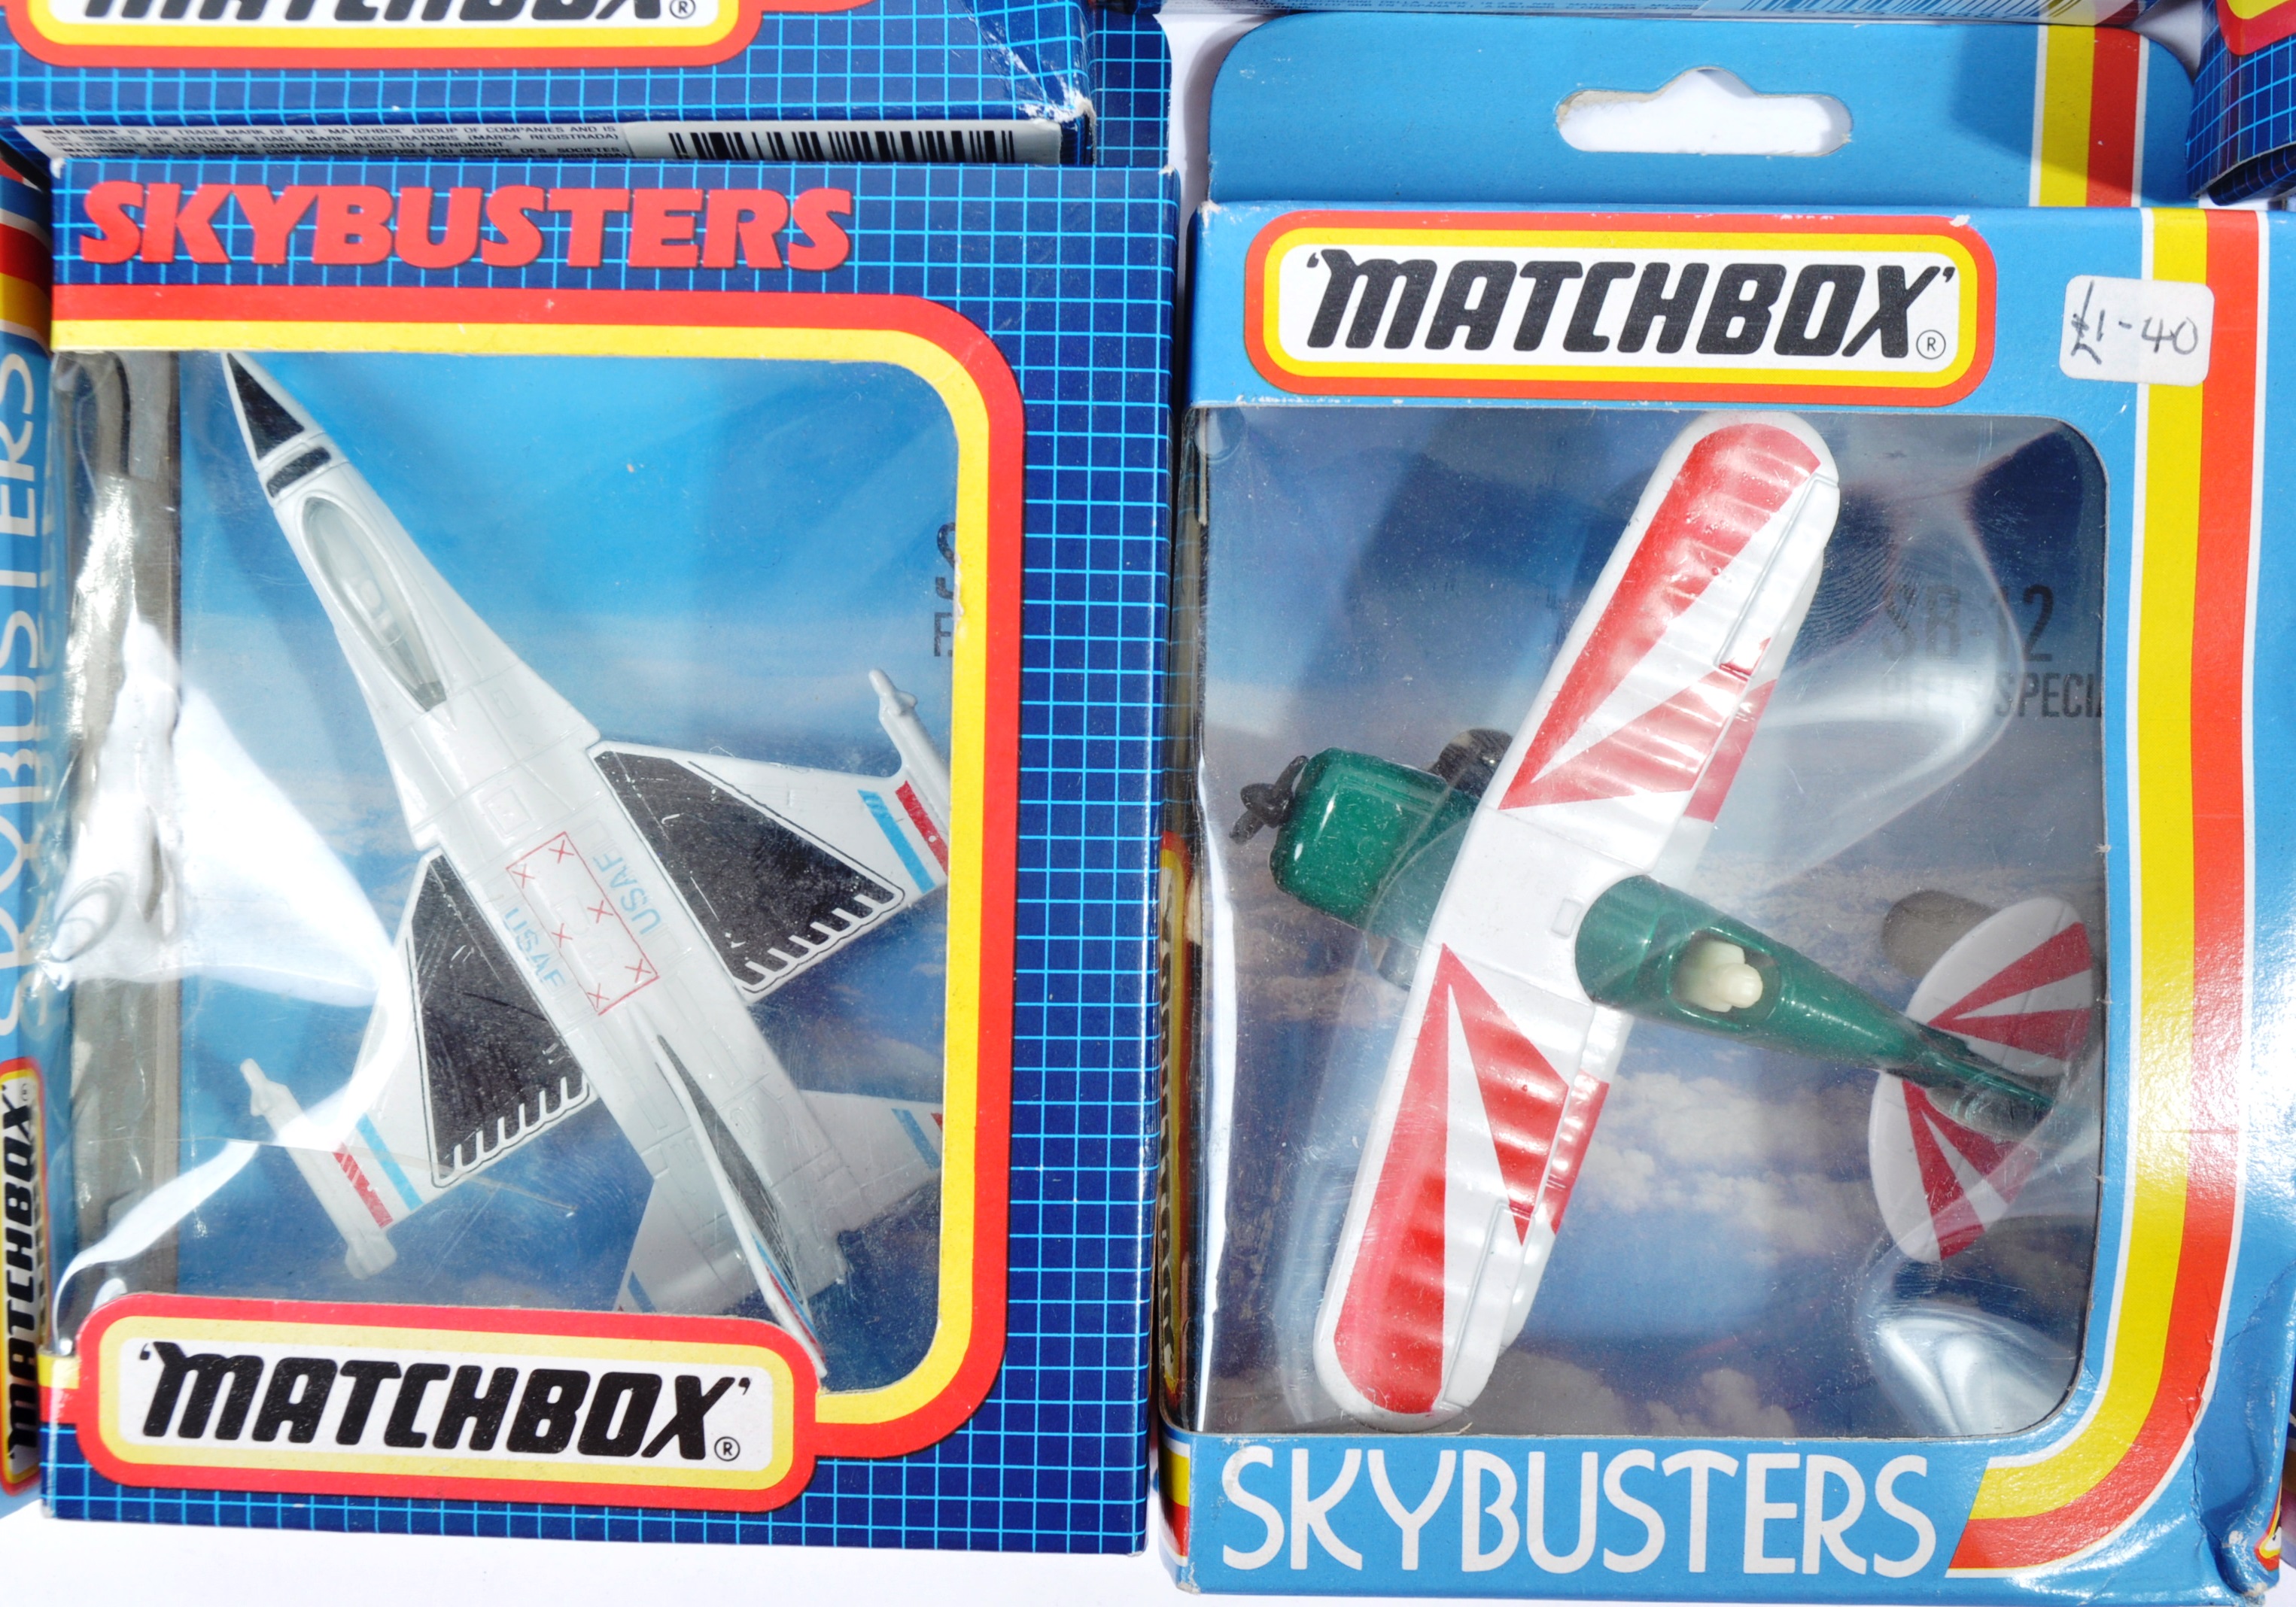 COLLECTION OF X15 MATCHBOX SKYBUSTERS DIECAST MODEL AEROPLANES - Image 4 of 7